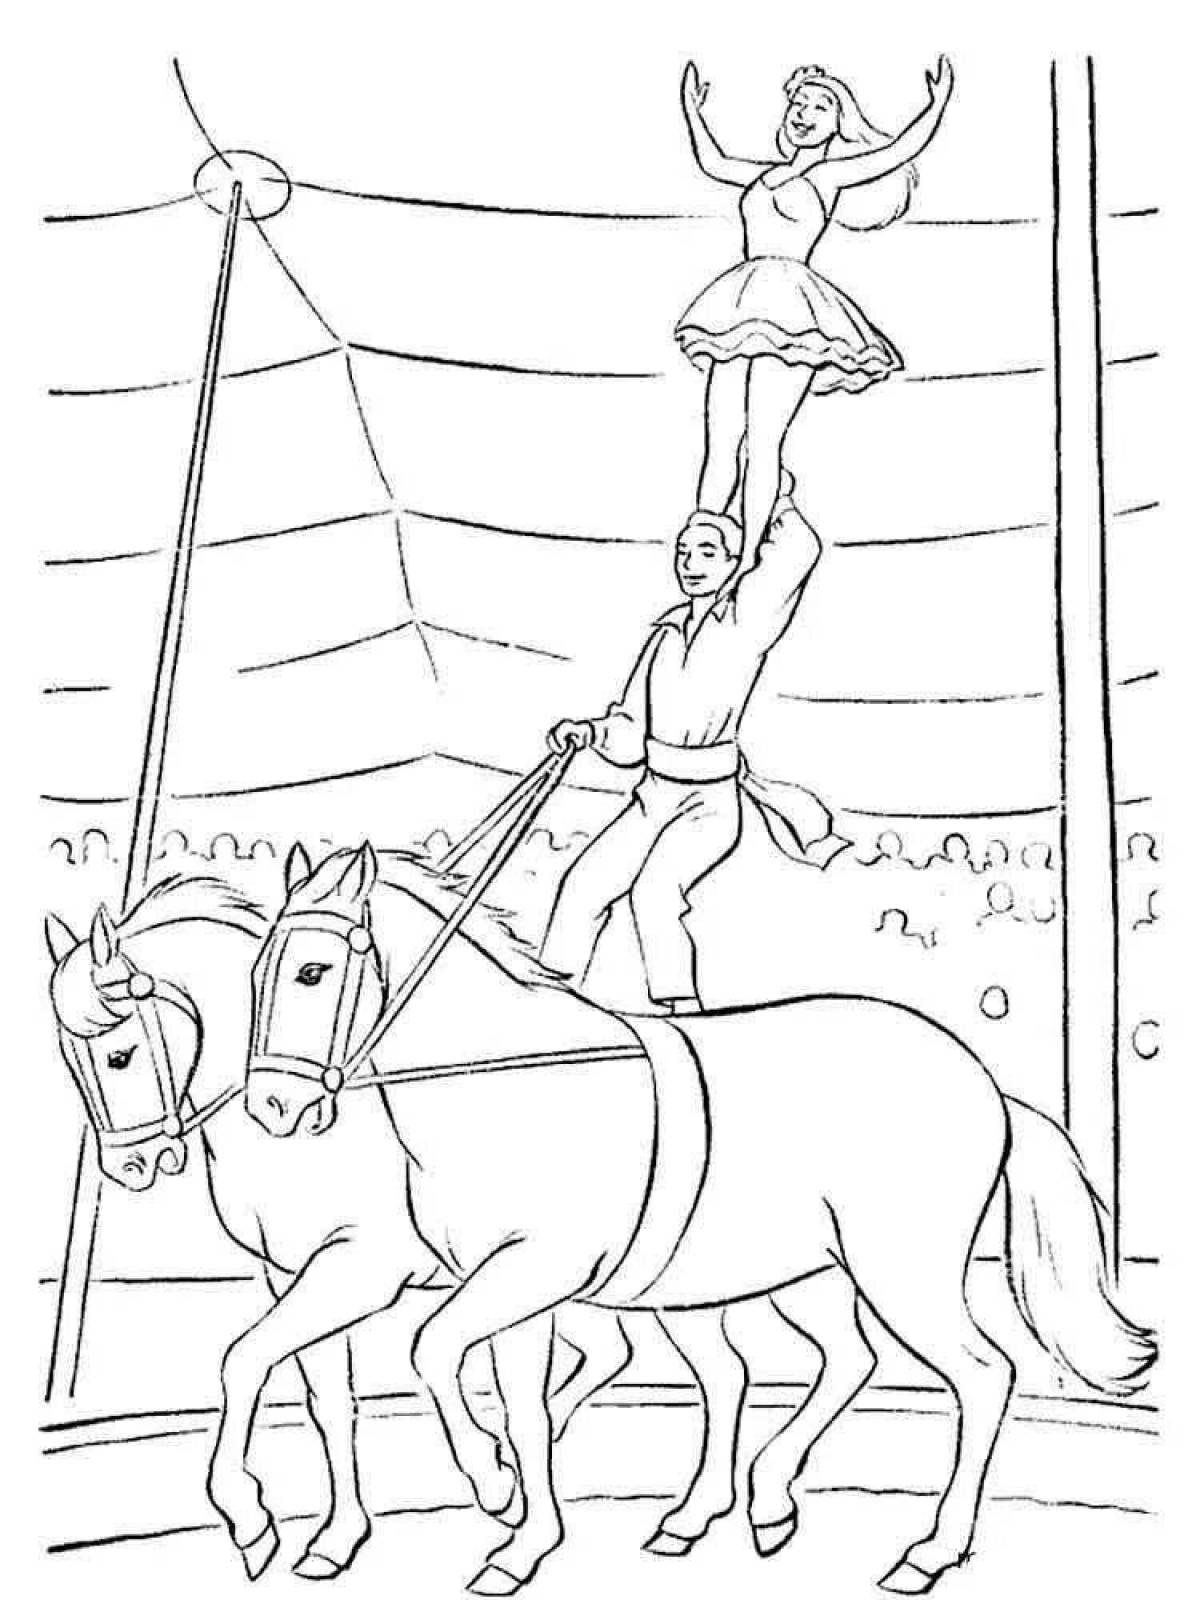 Glamorous circus coloring page for children 6-7 years old